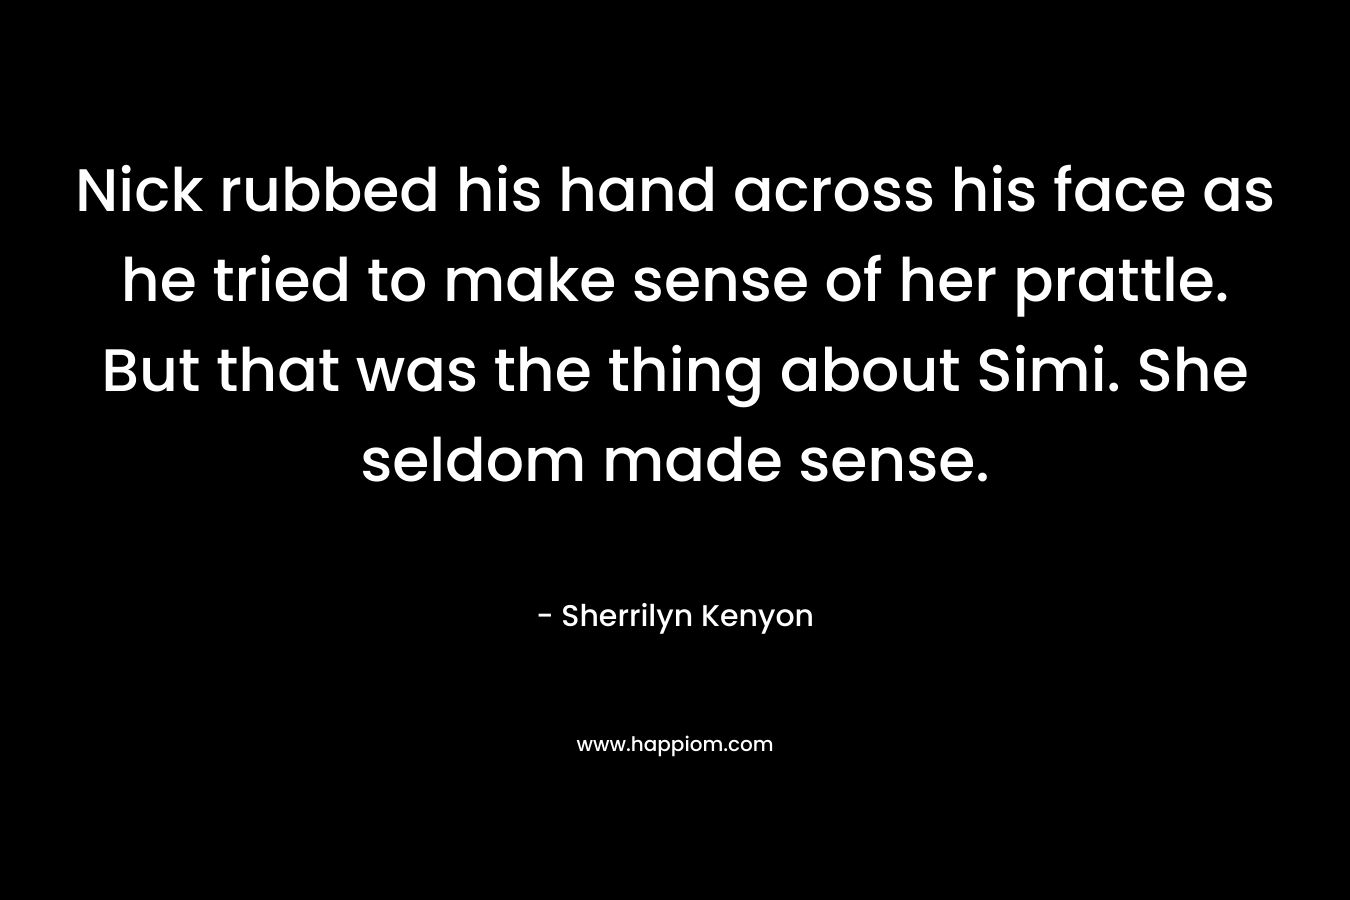 Nick rubbed his hand across his face as he tried to make sense of her prattle. But that was the thing about Simi. She seldom made sense. – Sherrilyn Kenyon